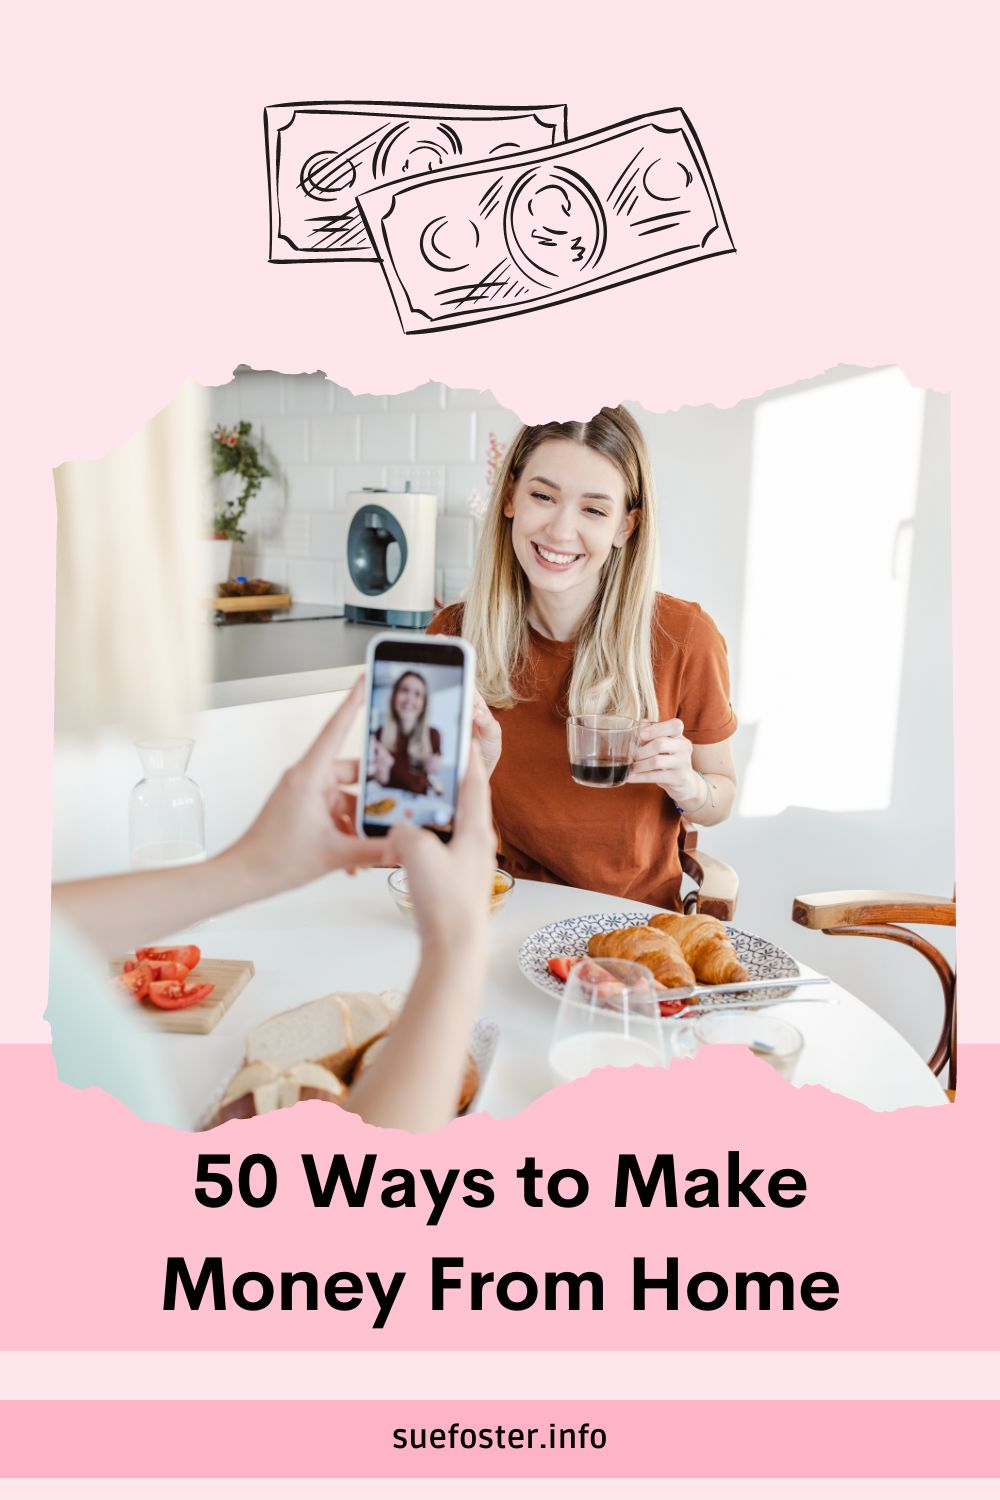 50 legitimate ways to earn money from home, whether it's extra cash or a full-time venture.